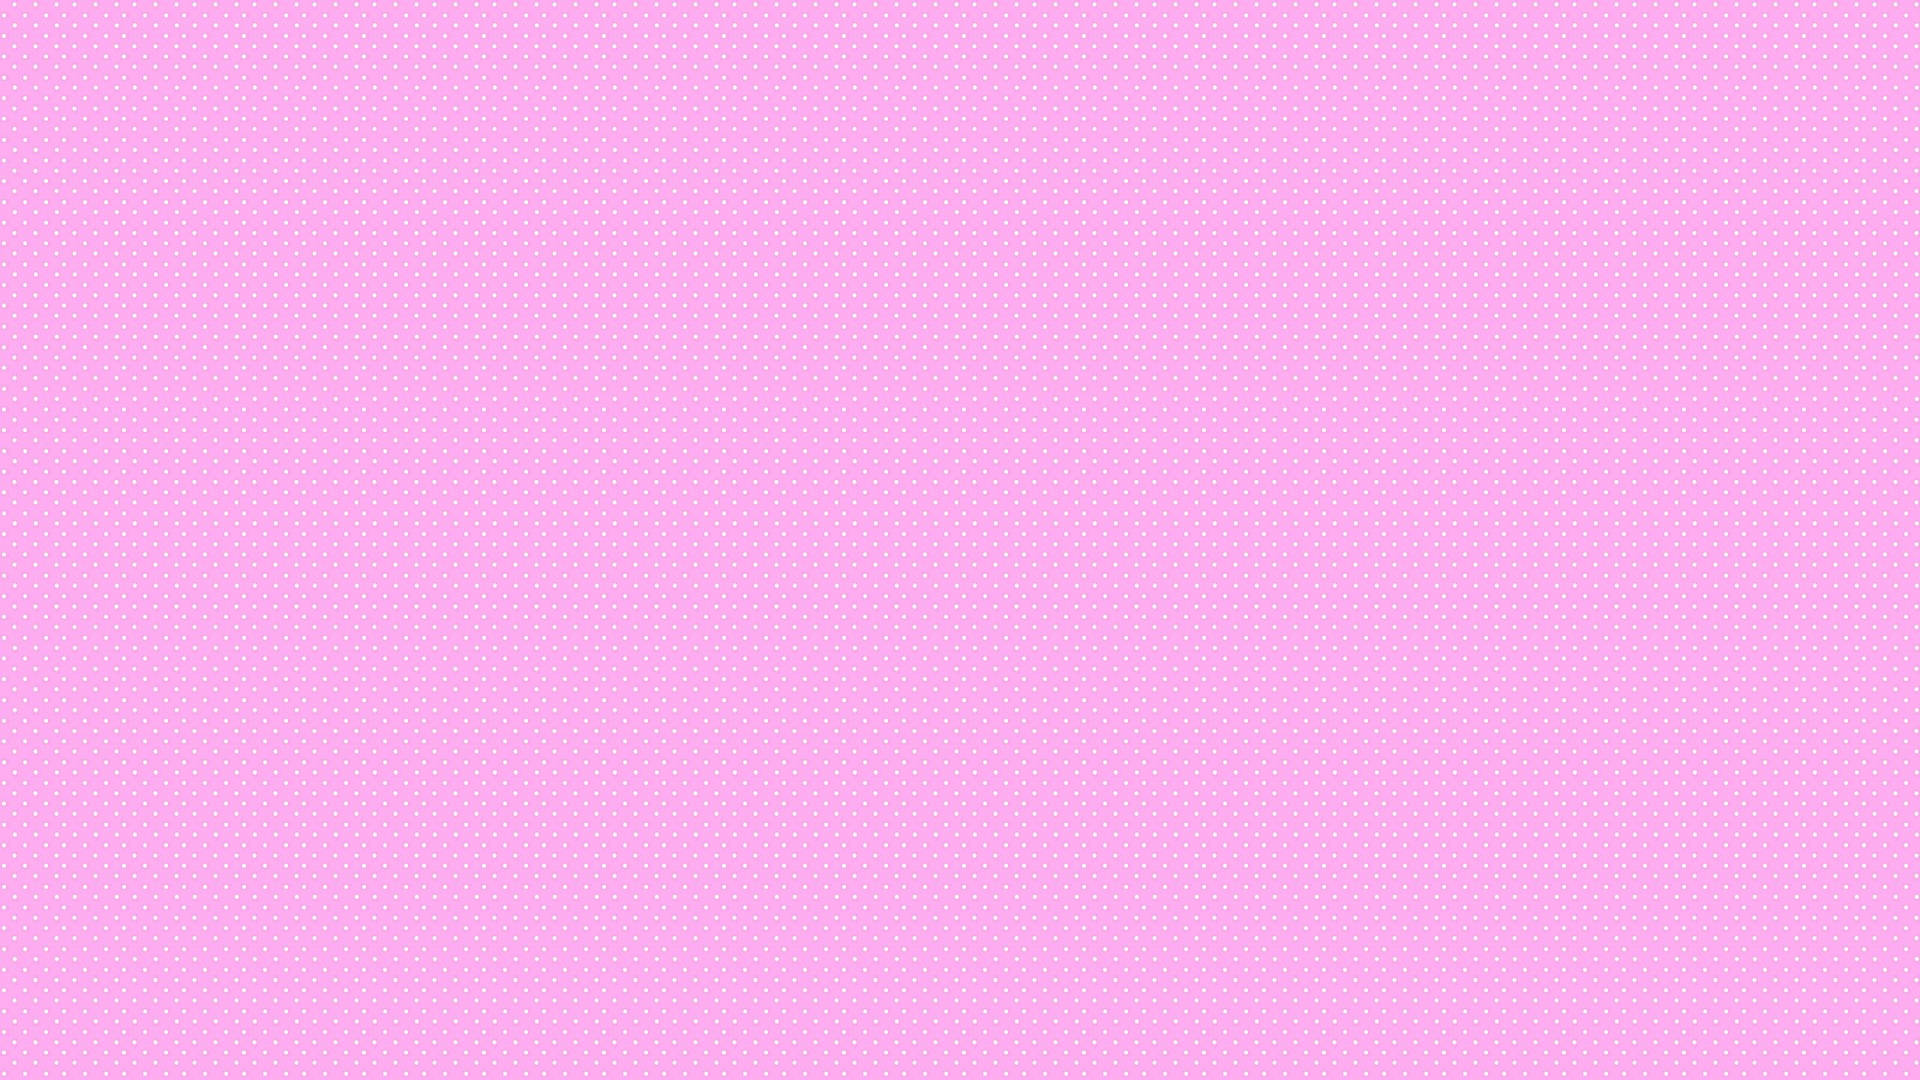 Aesthetic Youtube Pink With White Dots Background